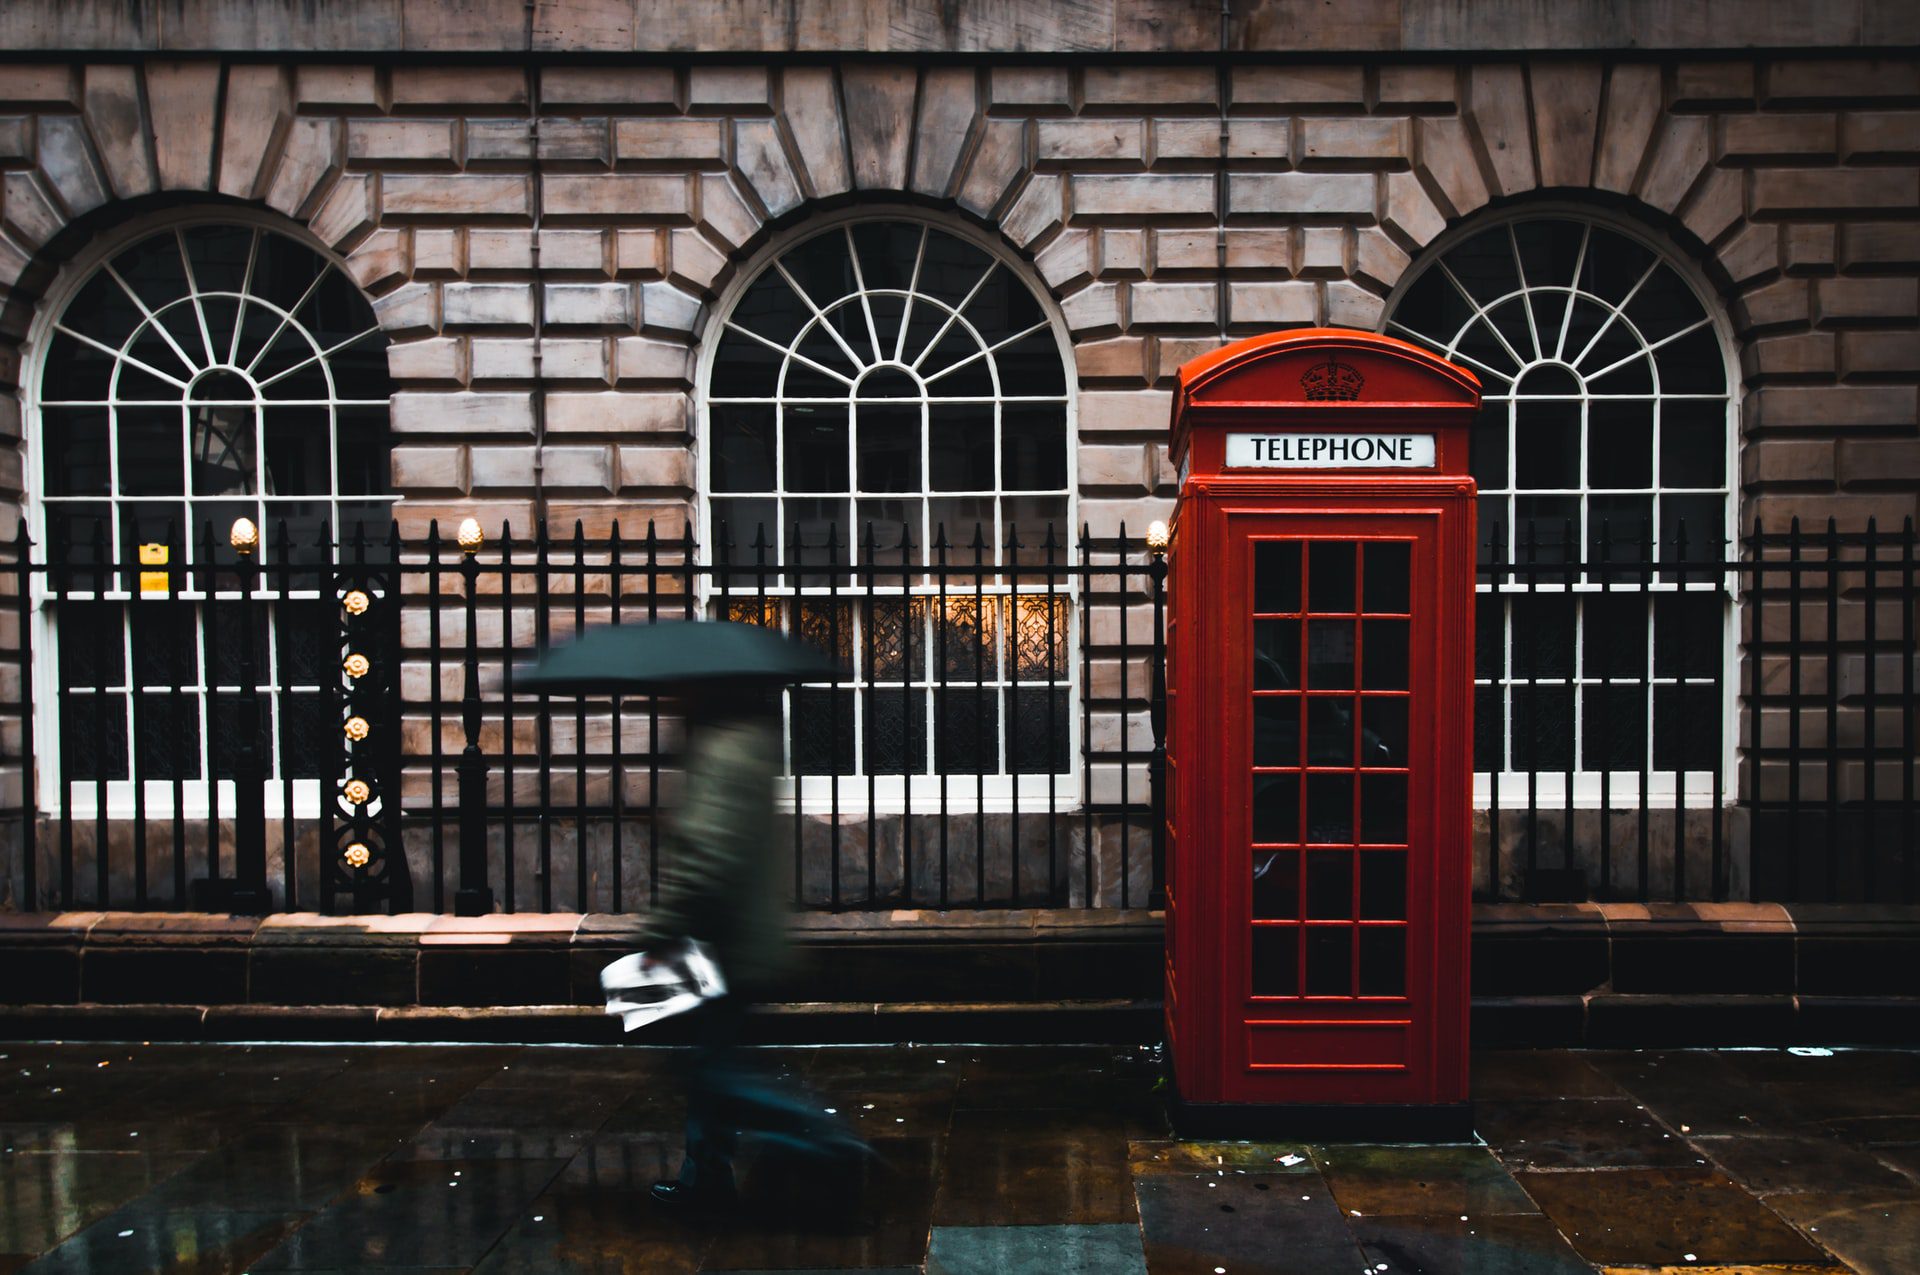 Signature red street phone booth in London with someone walking past it holding an umbrealla on a rainy day